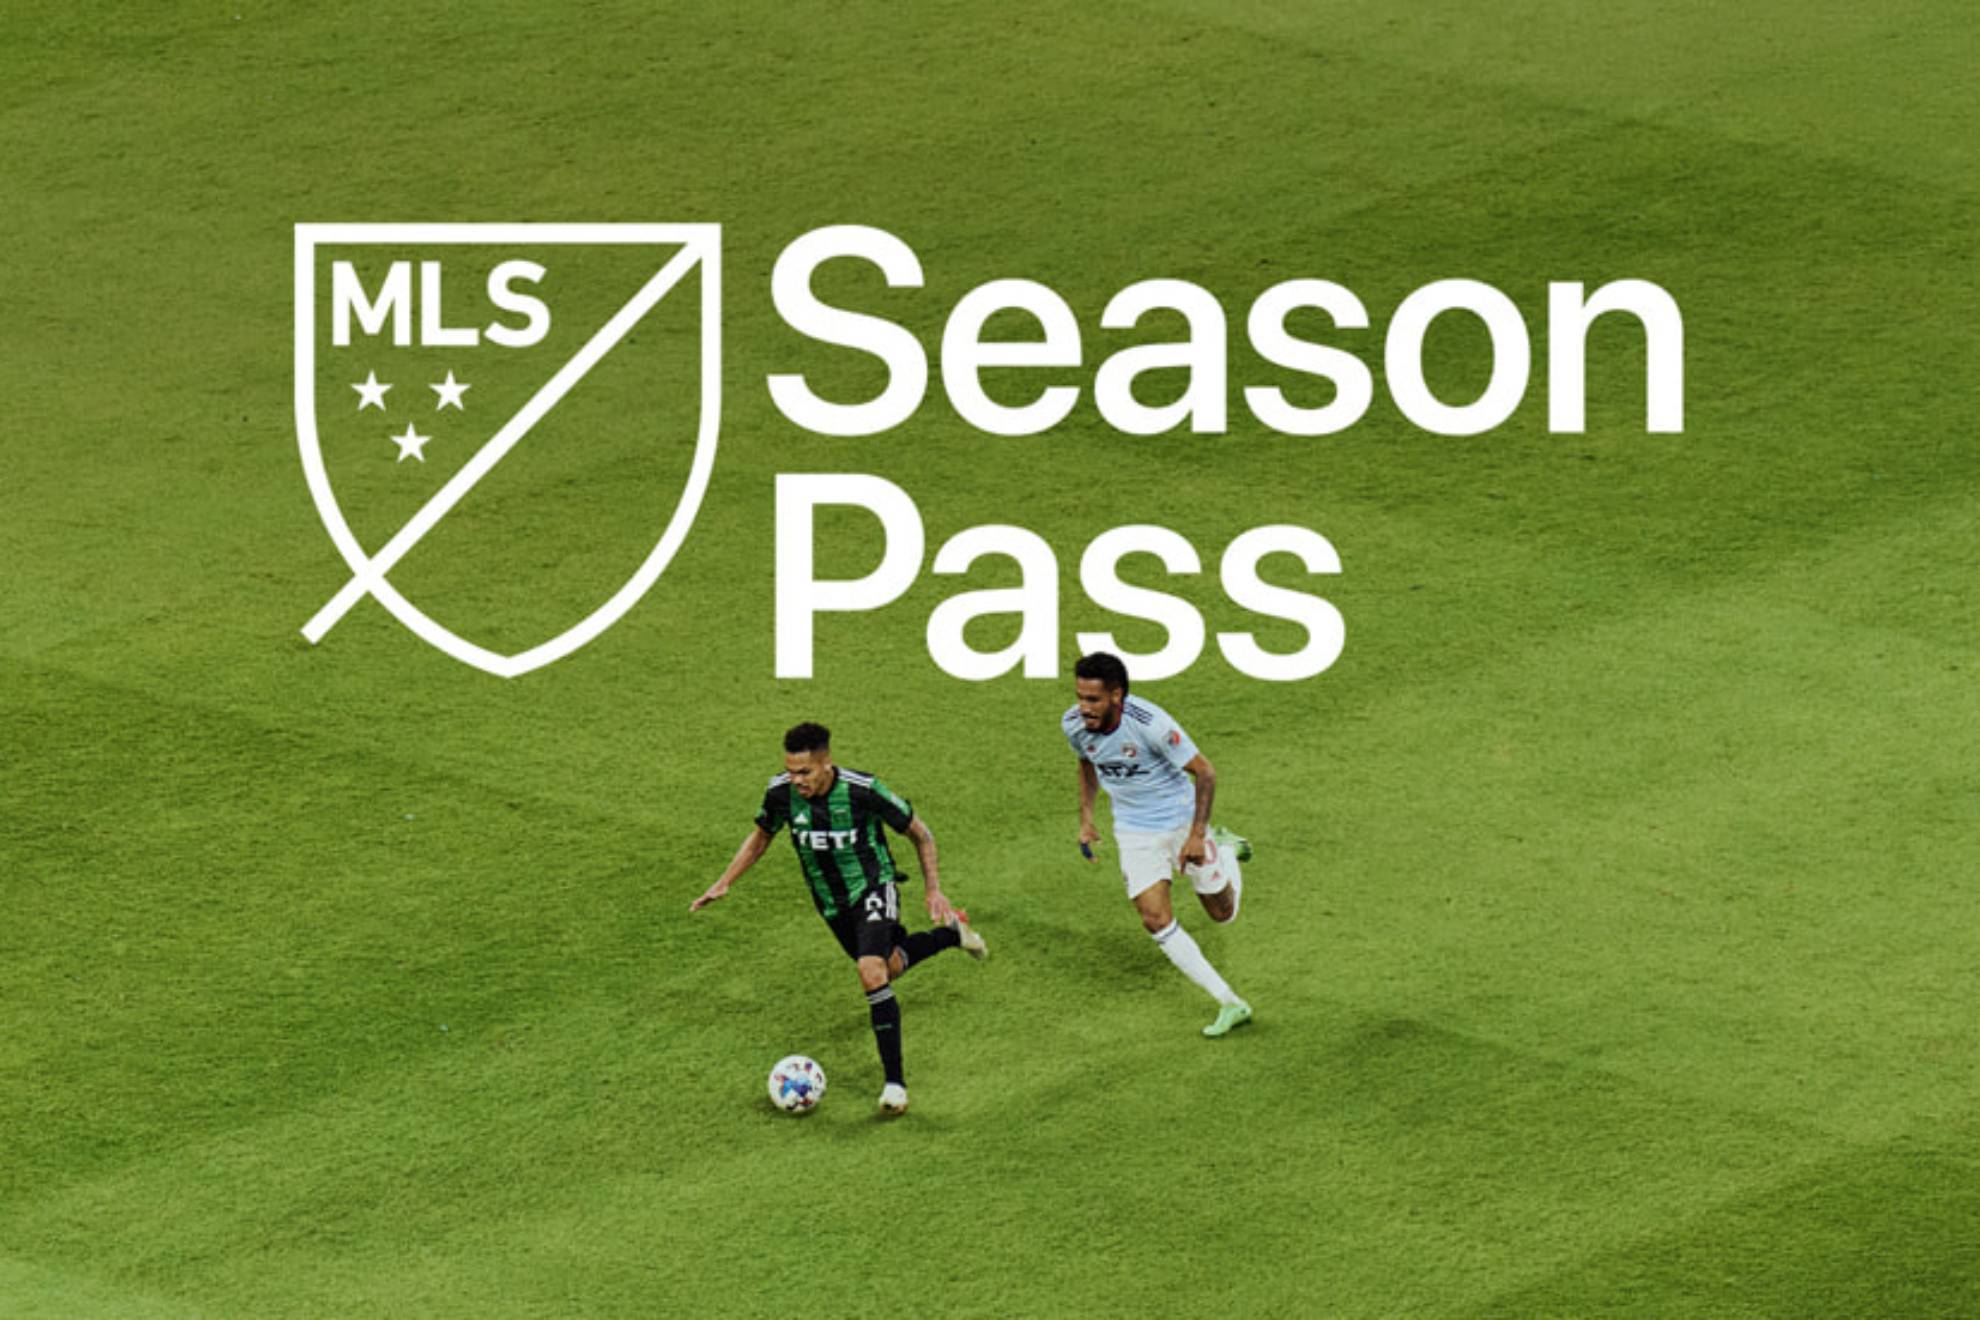 MLS Season Pass: How much does it cost to subscribe to the Apple TV app to watch all the games?